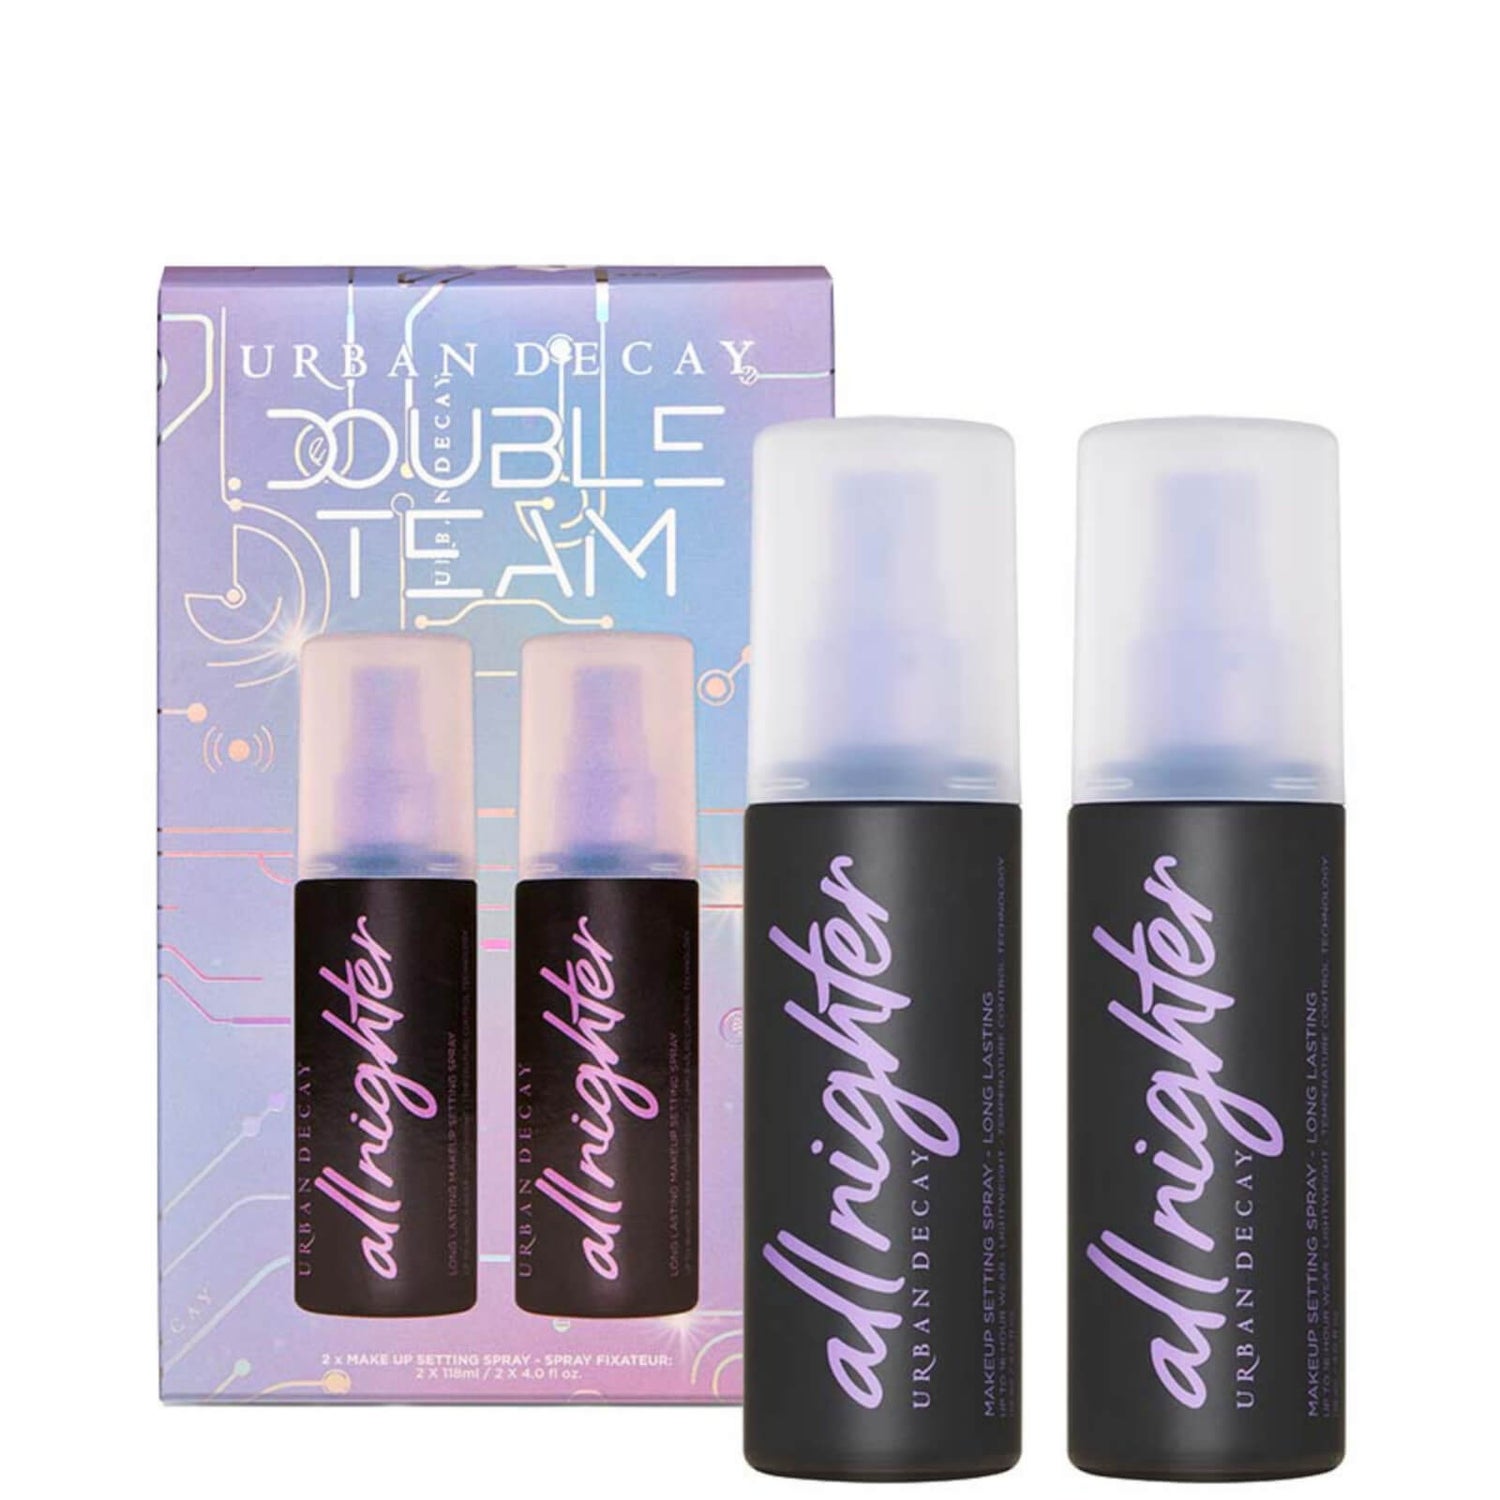 Urban Decay All Nighter Duo Set (Valeur £54.00)